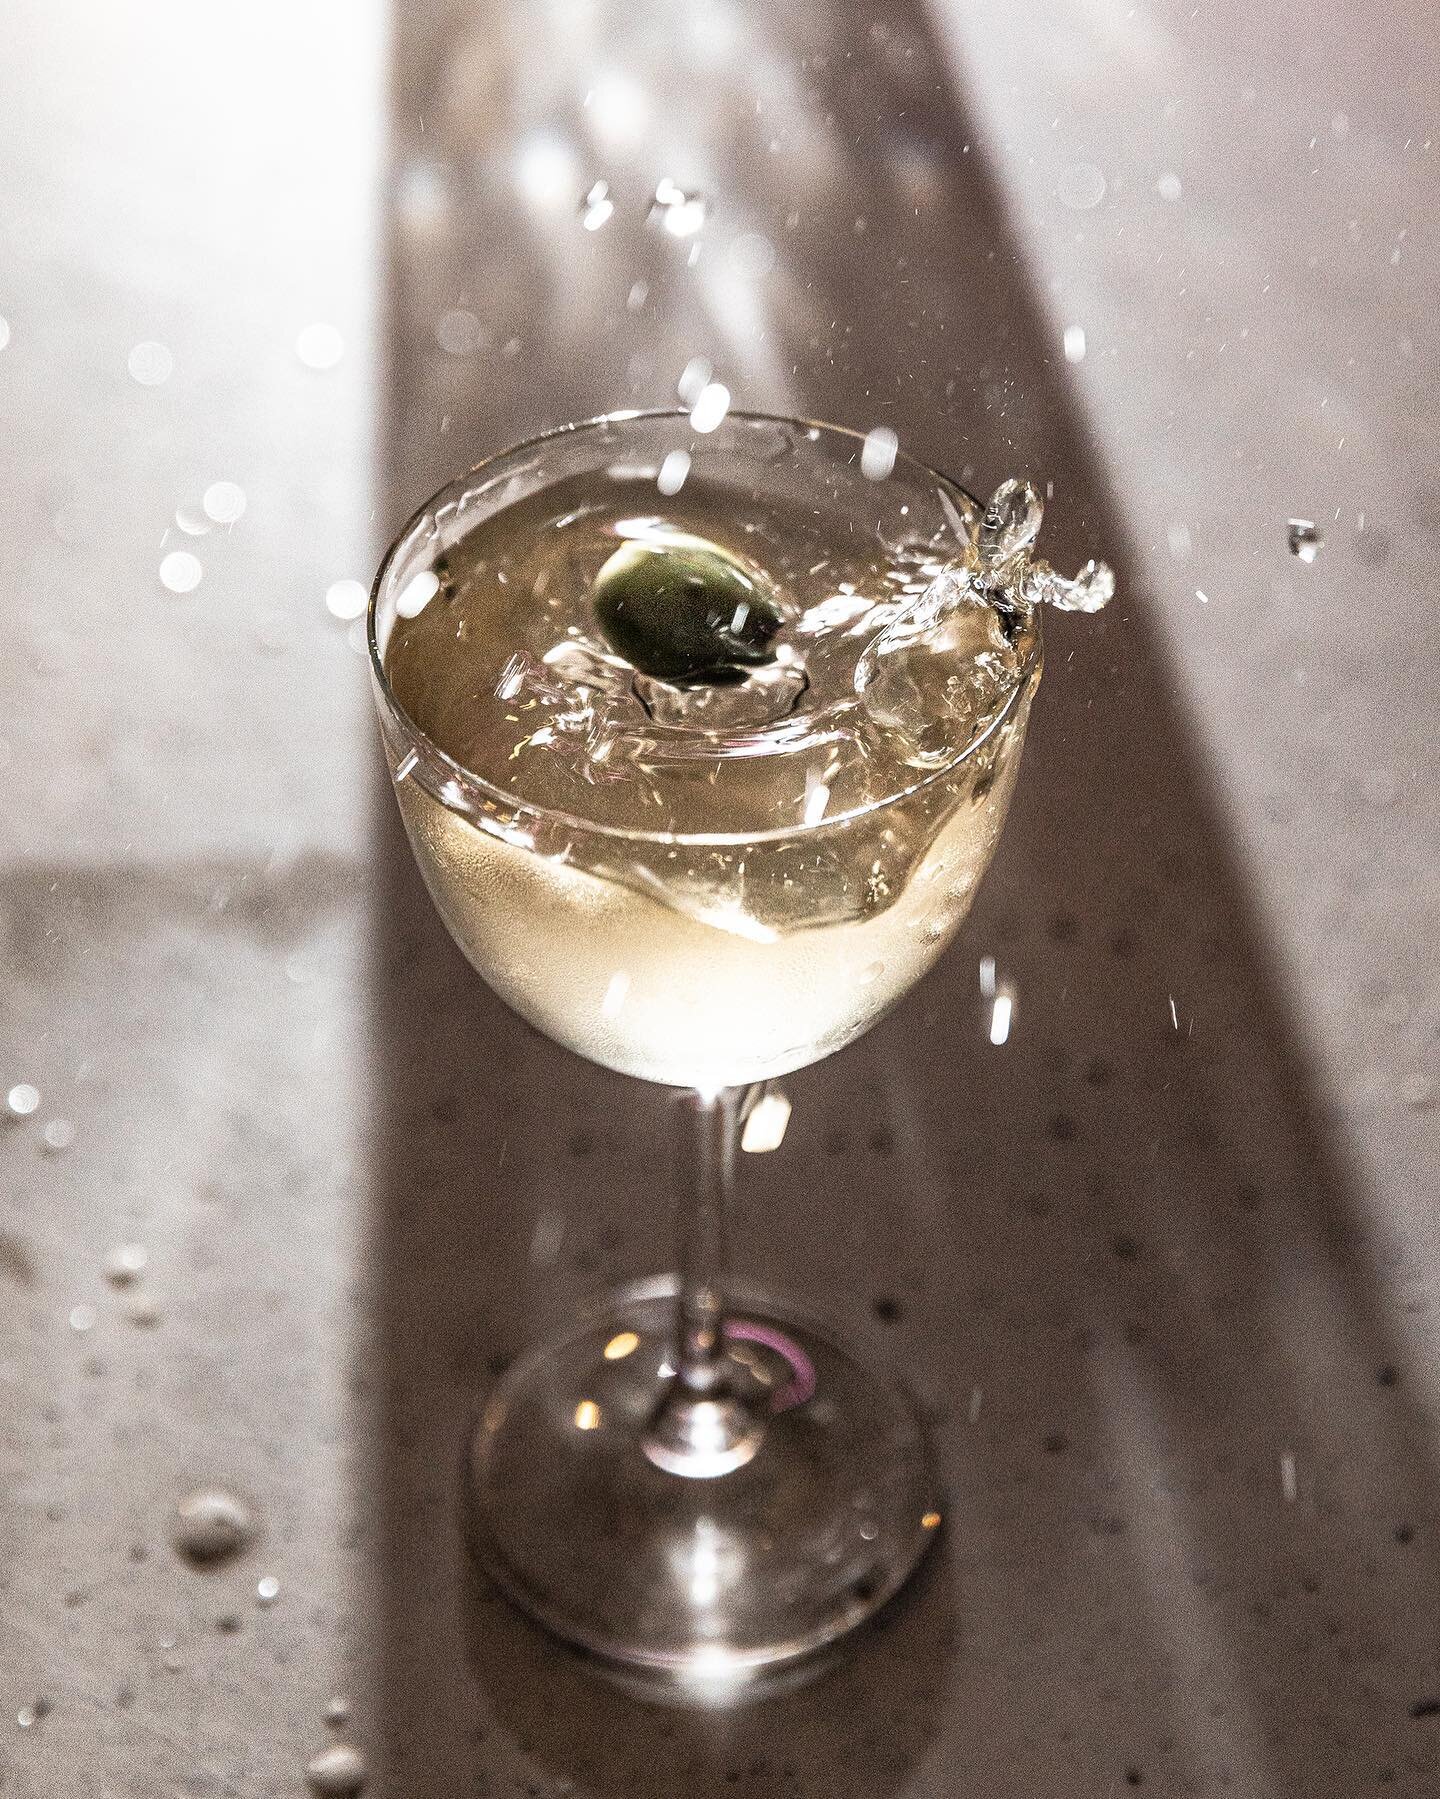 Slip out that rain and into a Martini

We love the classics &amp; on a FRIDAY 4-7pm they are only &pound;7 along with over 50 of your favourite Classic cocktails 
.
.
📸 @wren.pro 

#martini #cocktail #mixologist #bar #bartender #fun #creative #appro